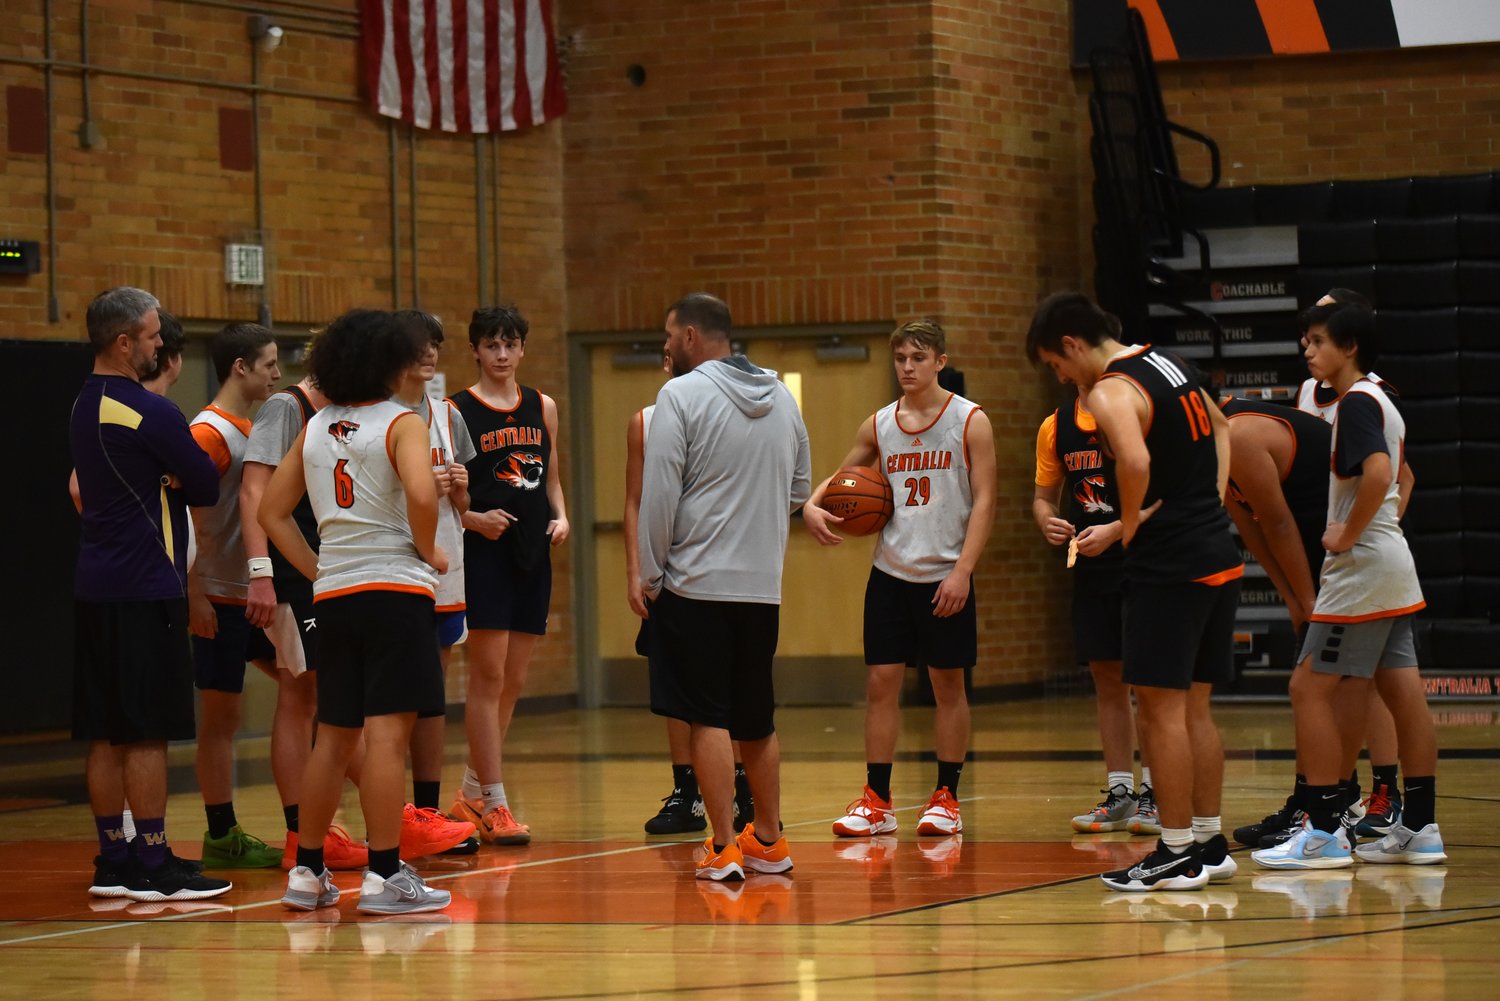 Centralia coach Kyle Donahue talks to his team at the end of the Tigers' practice on Nov. 23.